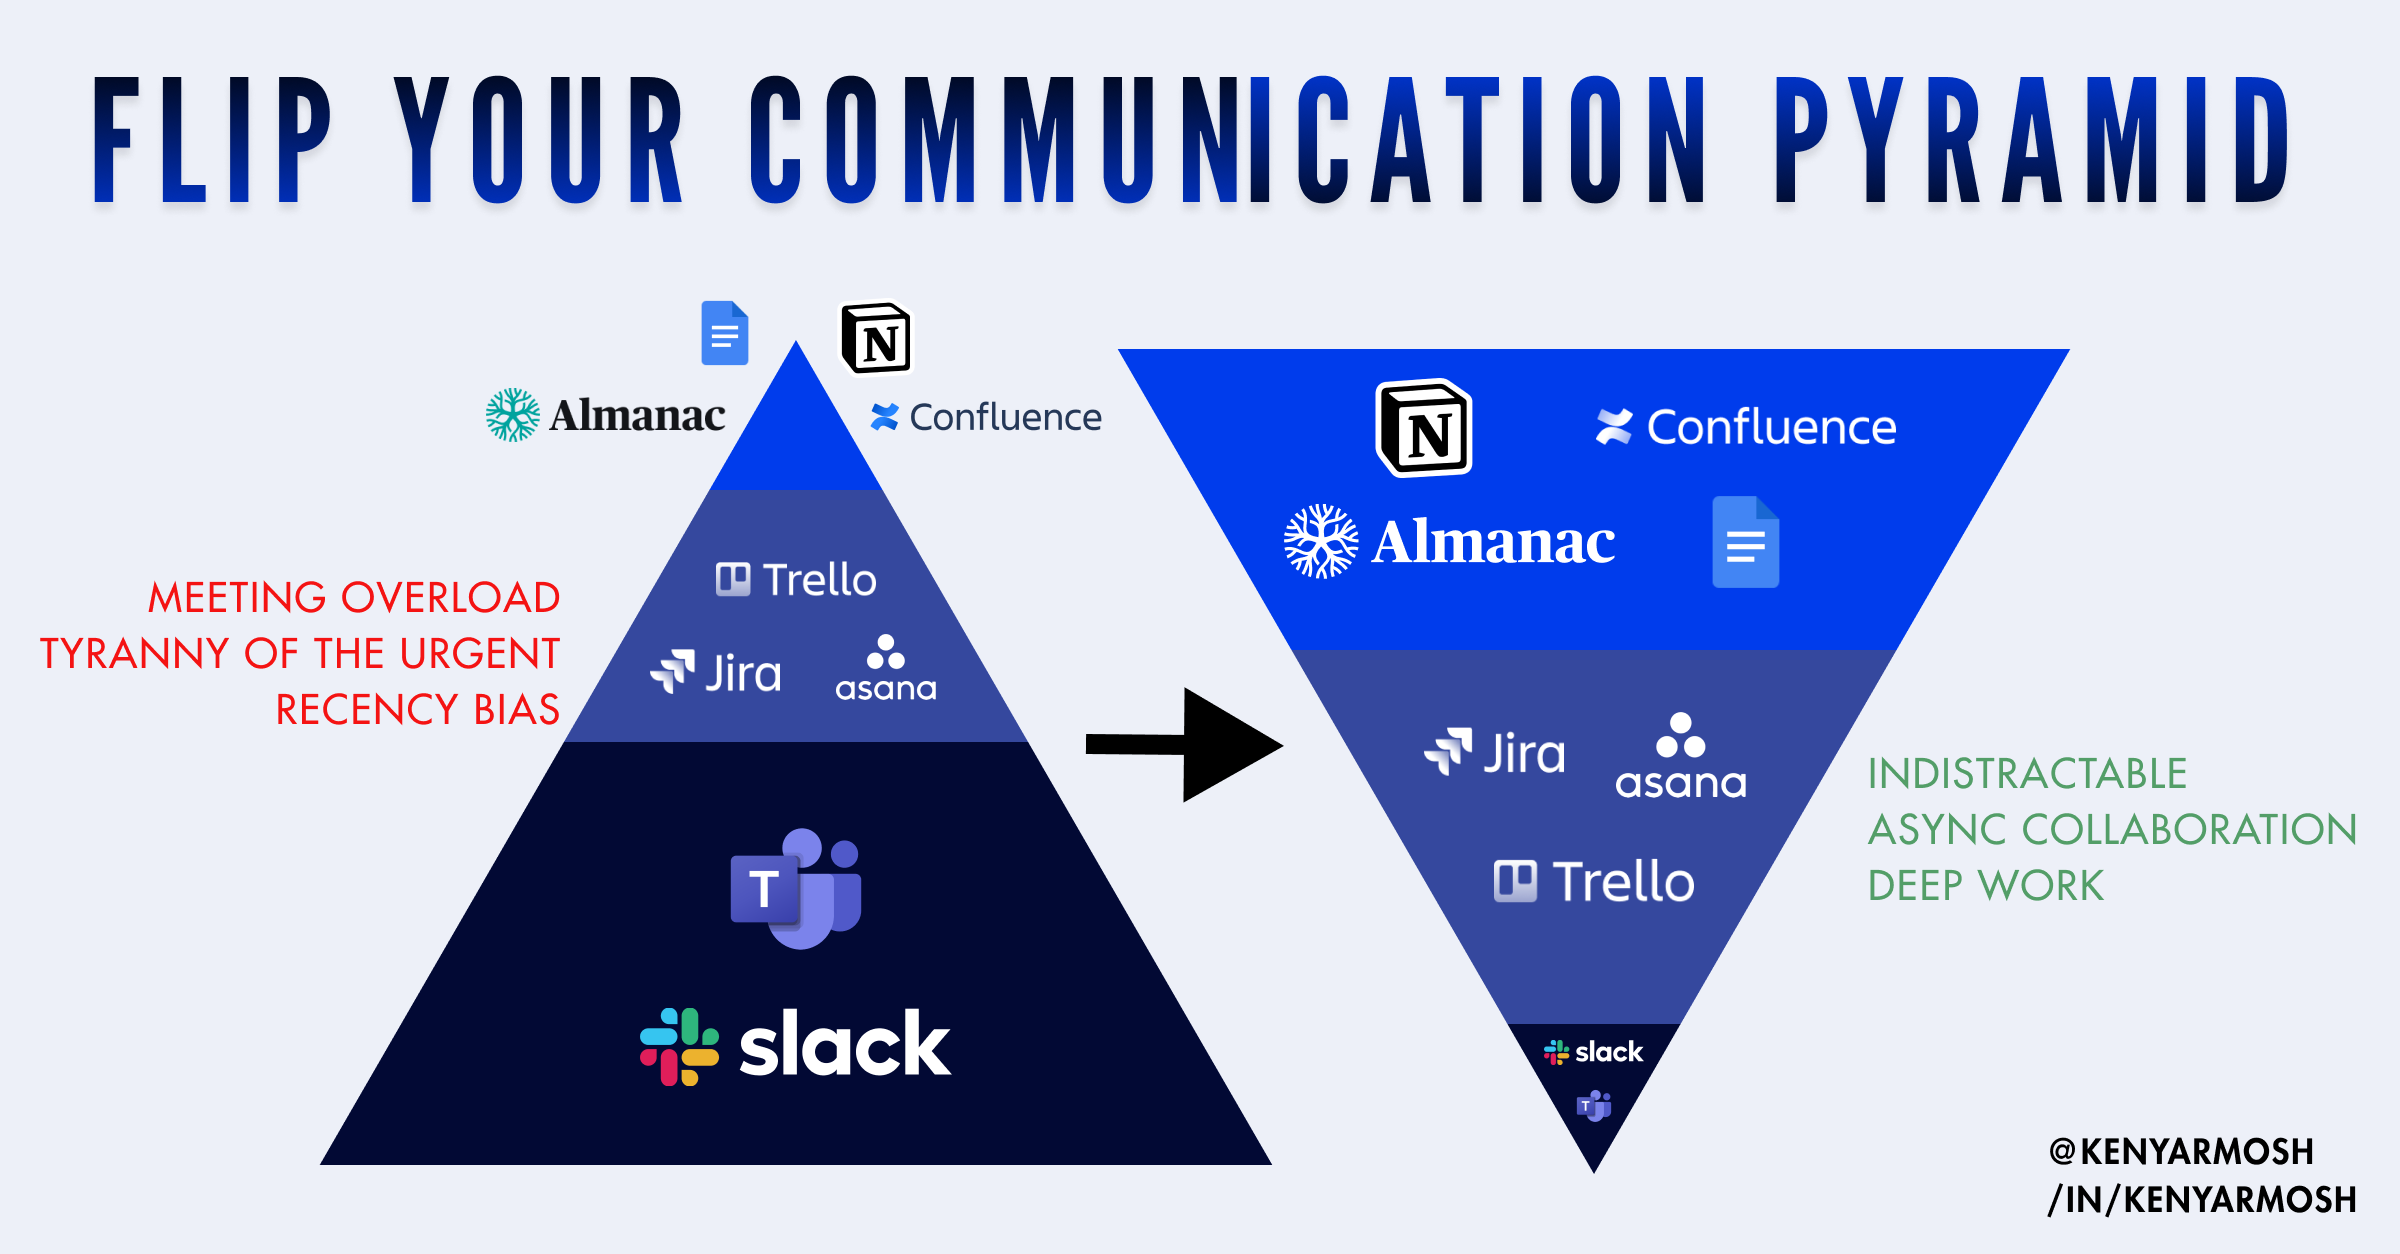 Getting Started with Async Collaboration: Flip Your Communication Pyramid